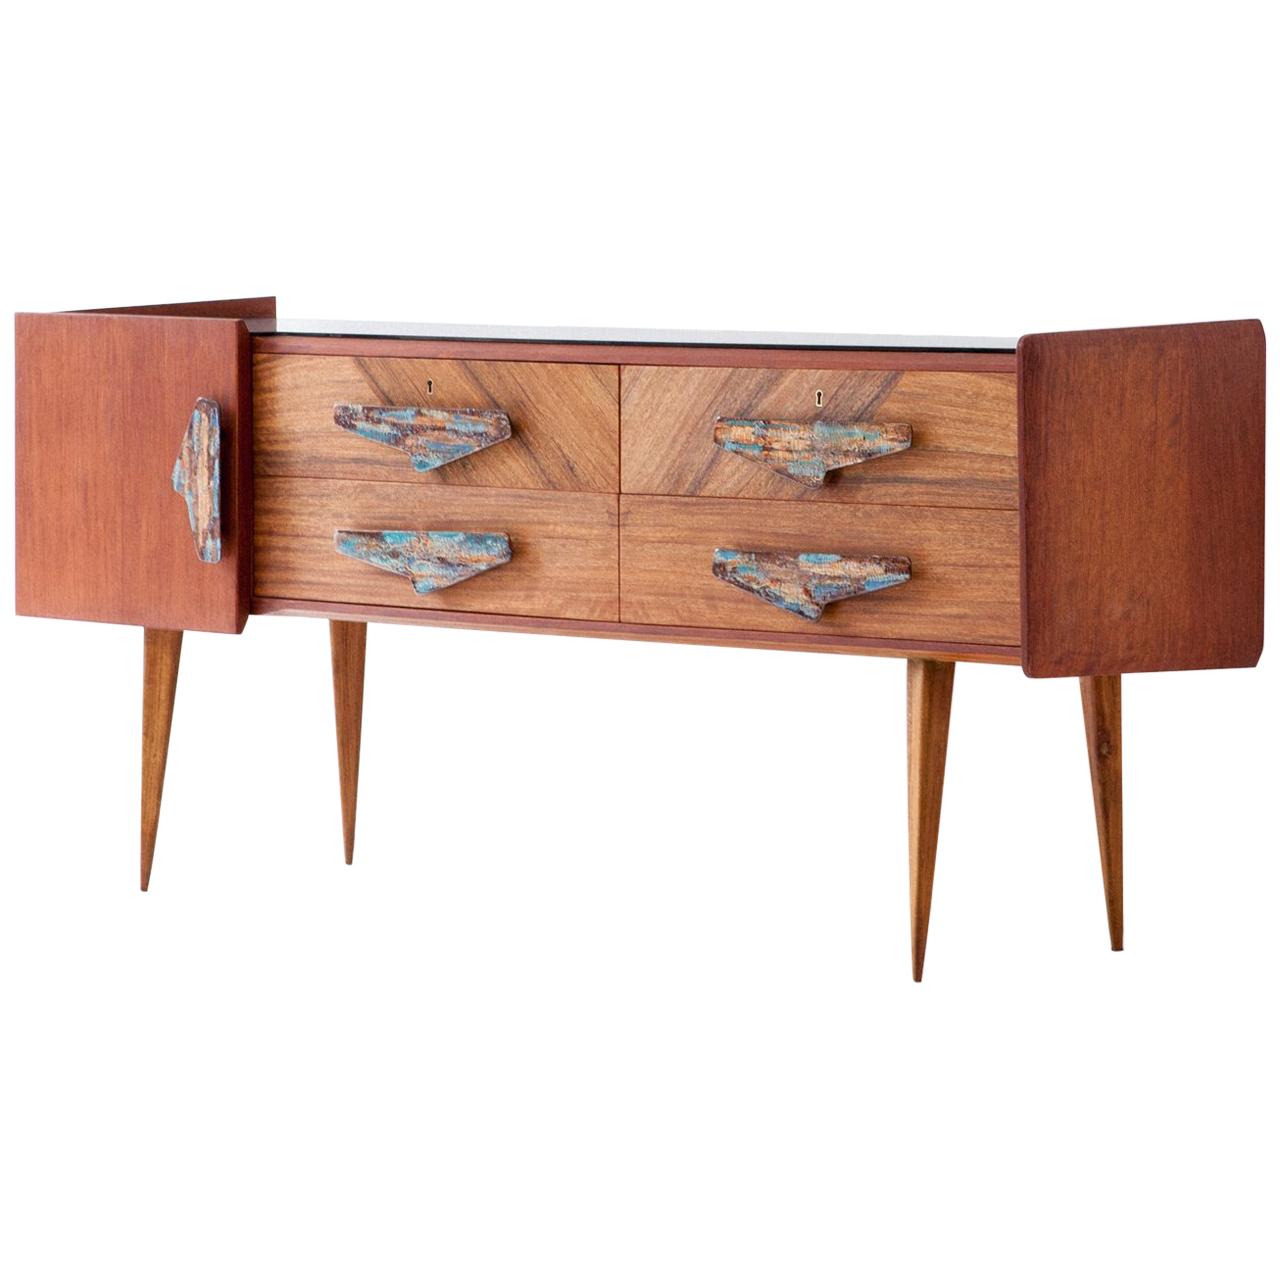 Rare Italian Mahogany and Teak Sideboard with Chest of Drawers, 1950s